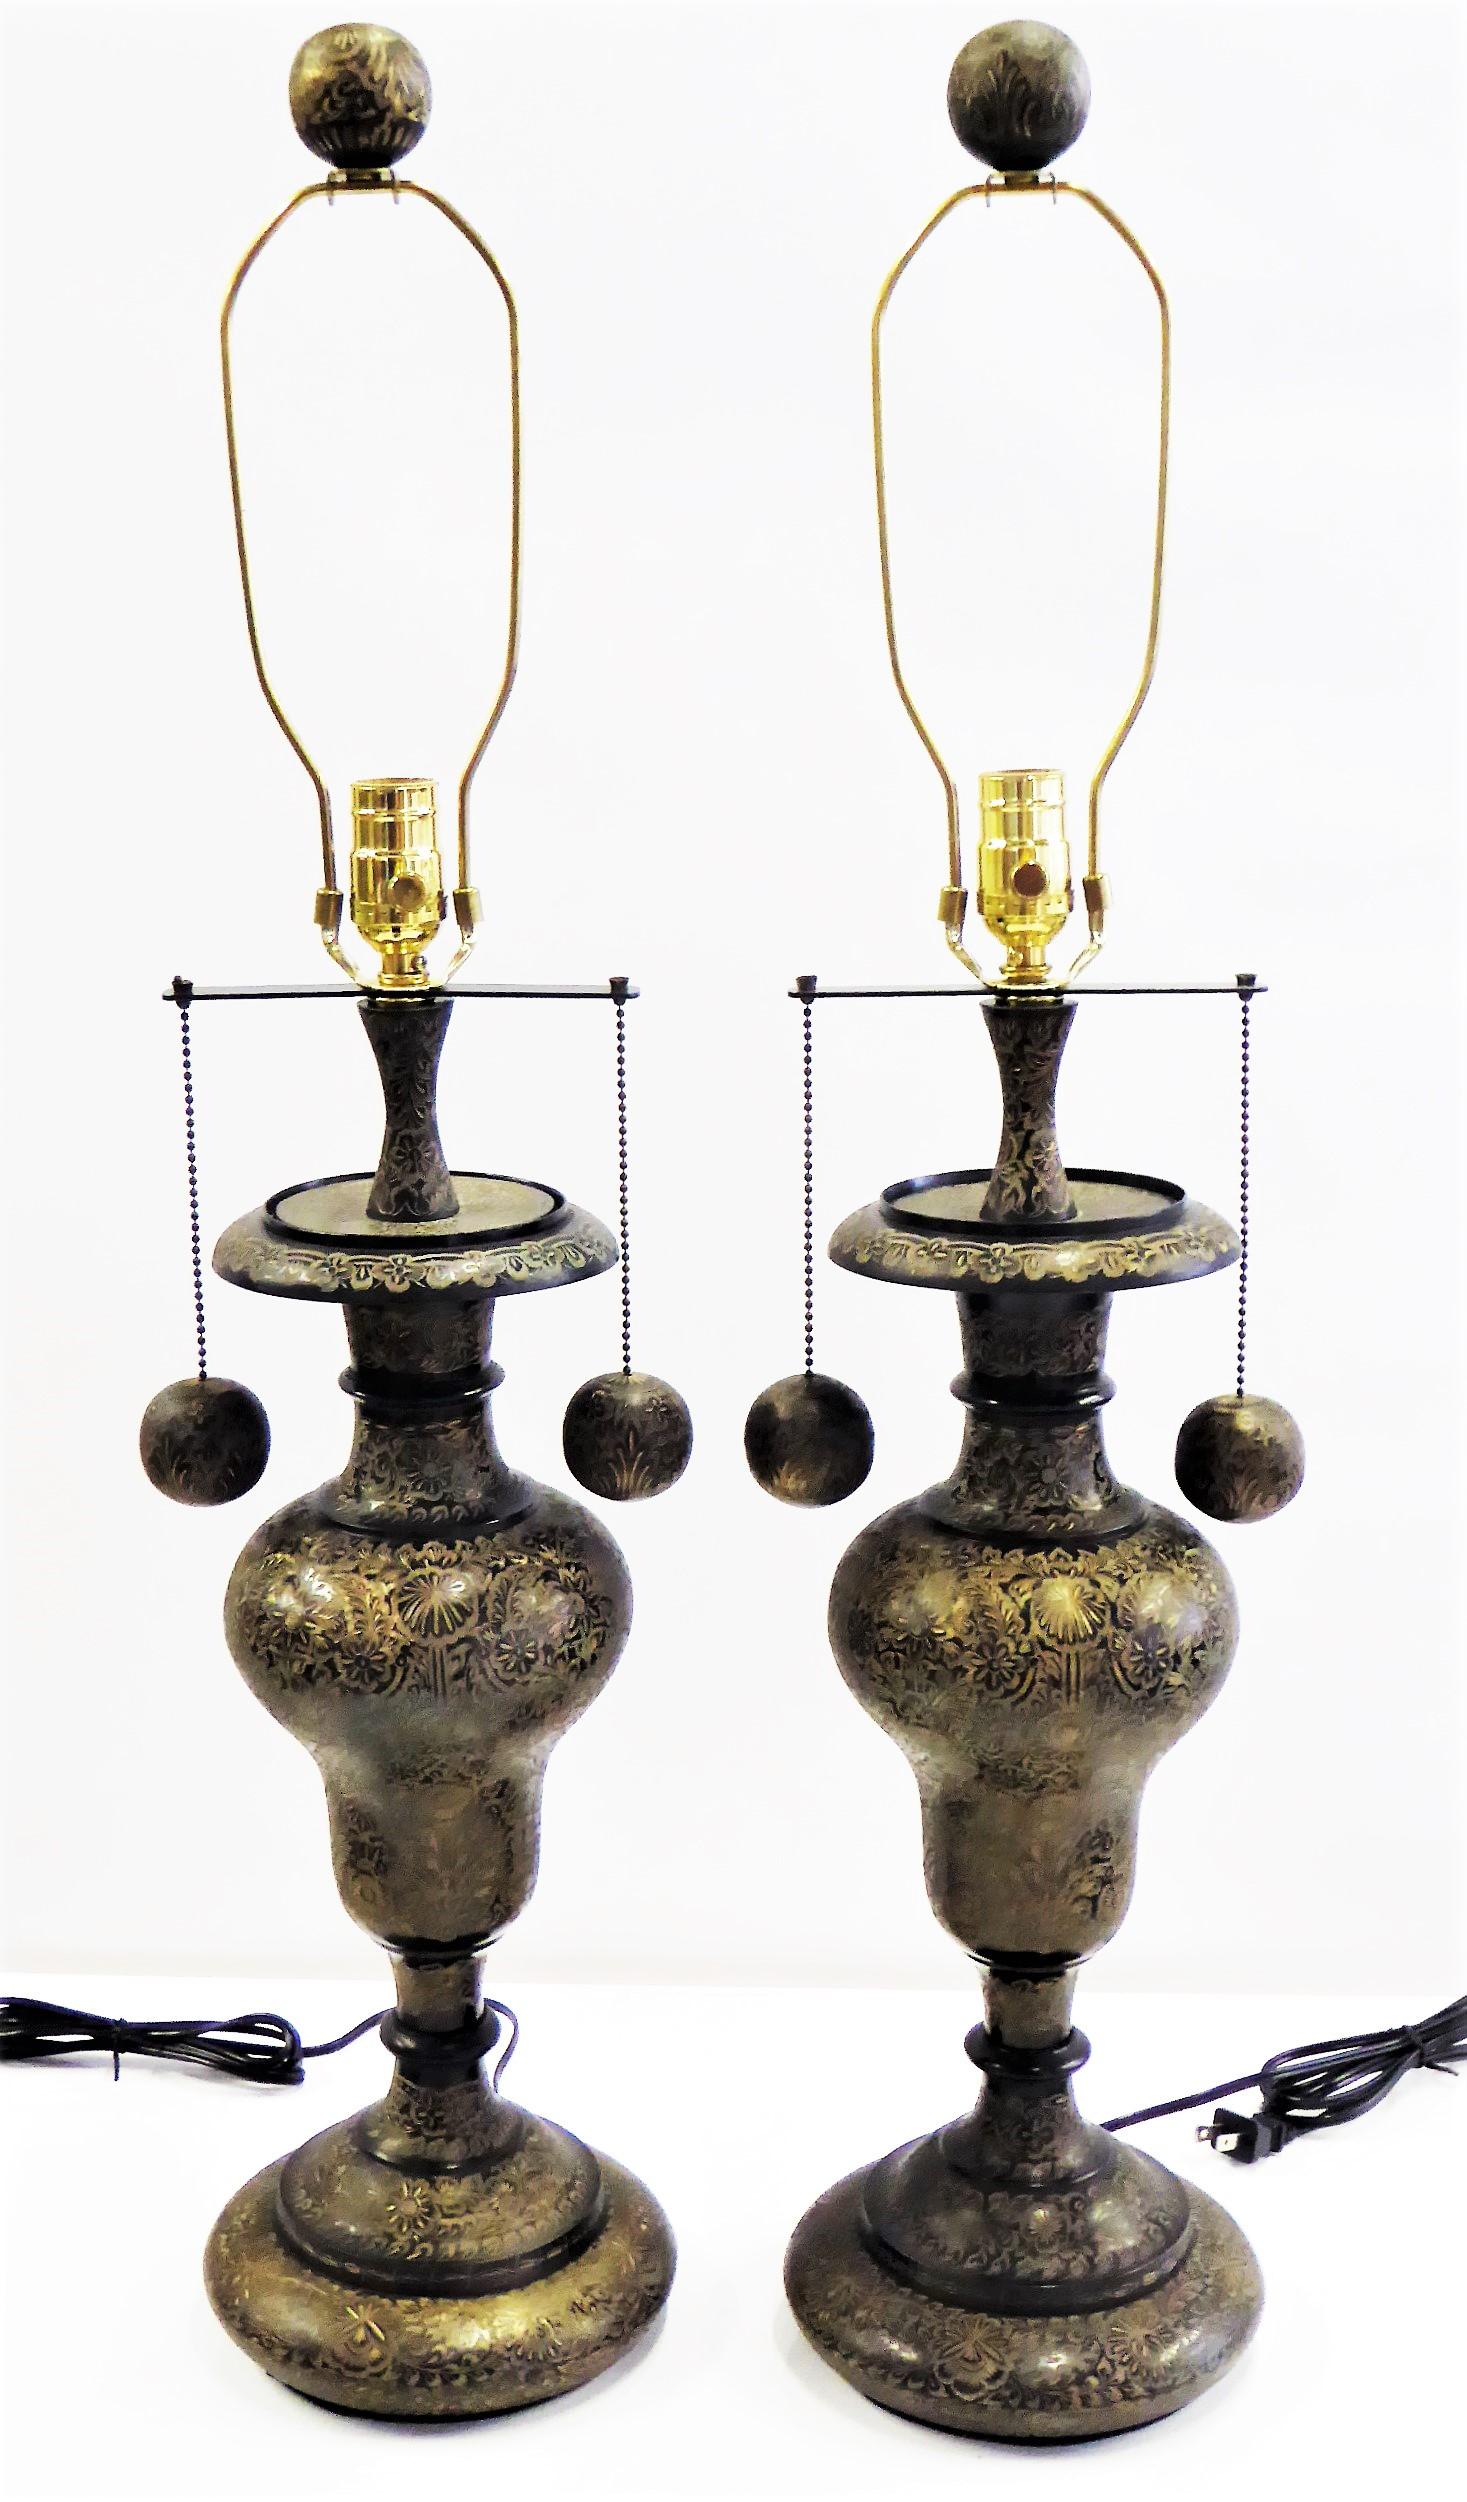 REDUCED FROM $1,280....Exquisite arabesque floral carved brass shines brightly through the patination on this pair of brass vase form lamps with matching carved hanging balls and finial. Antique forms, elegant and rich. Rewired and with new UL three